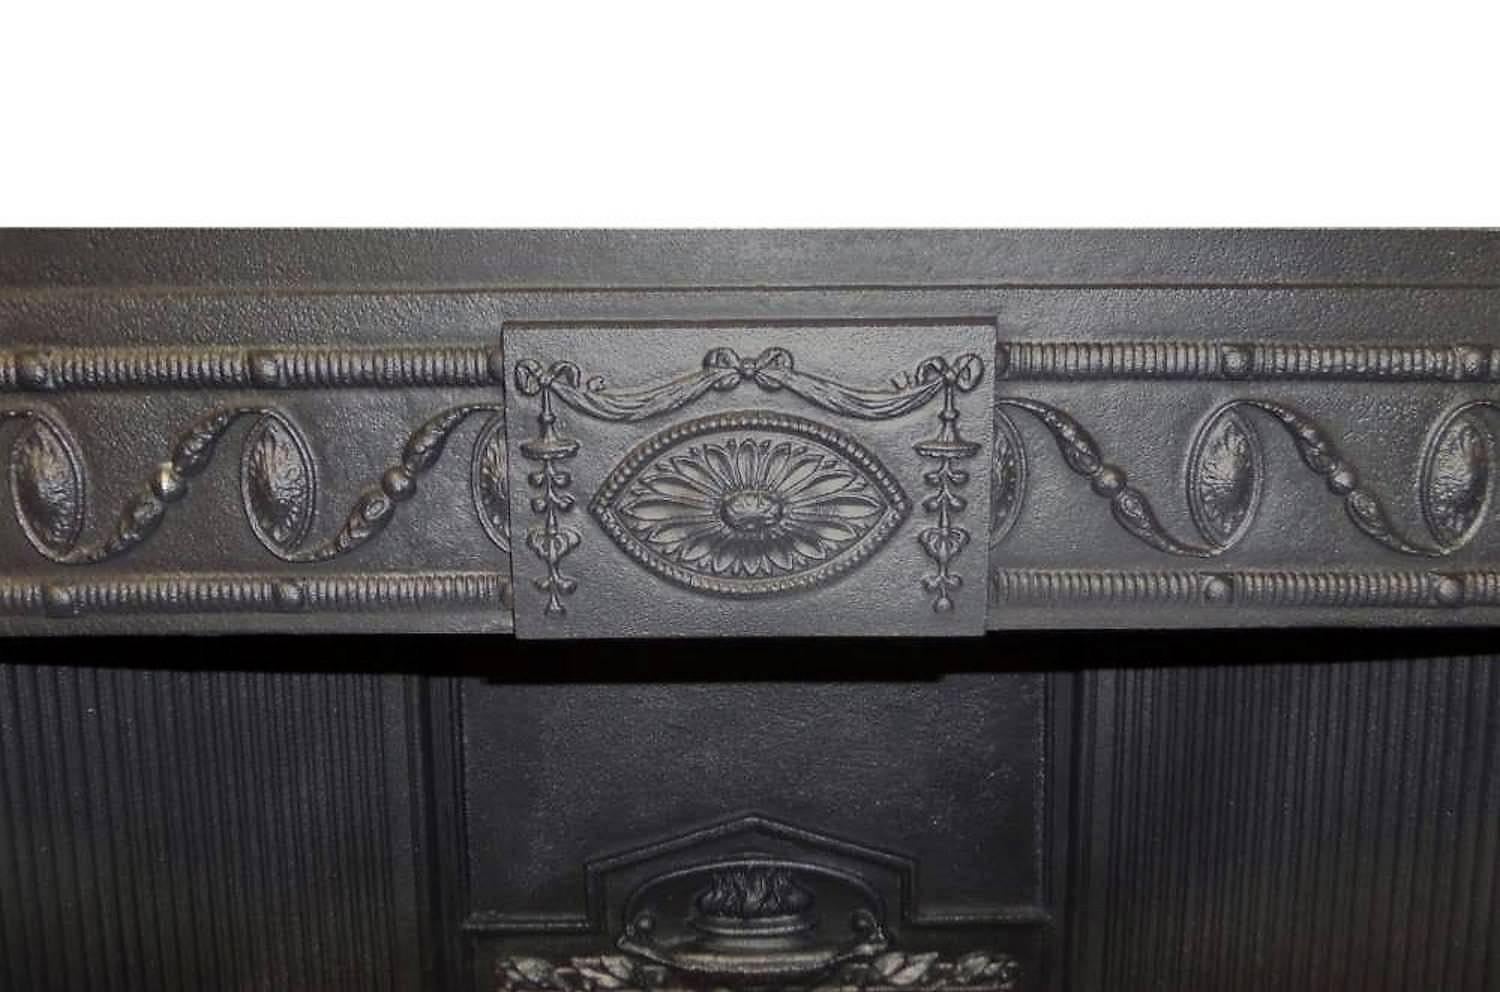 Antique restored late Georgian or Regency Hob Grate fireplace. Finished in a traditional black polish and complete with a replacement chimney isolation damper plate.